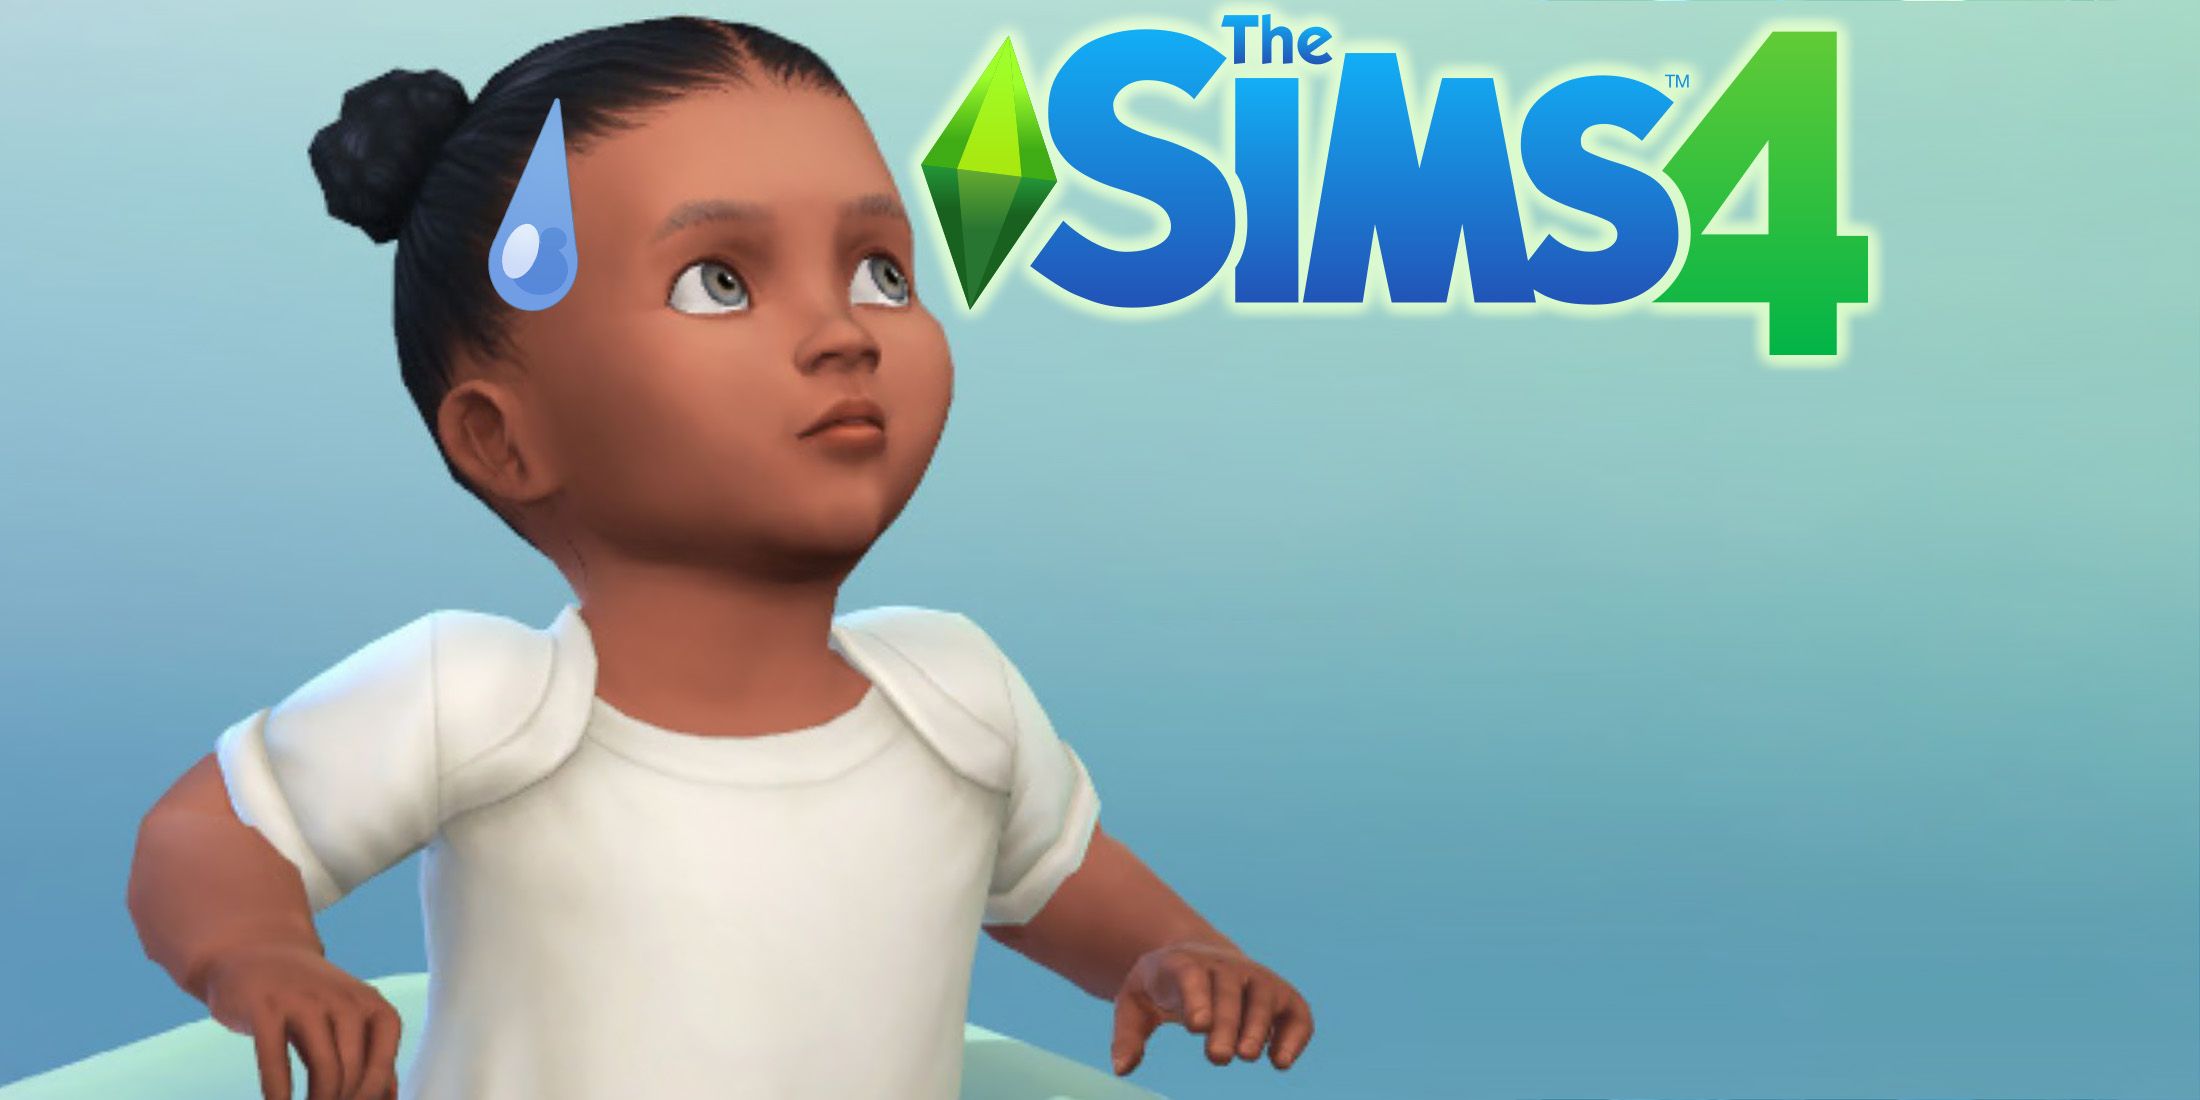 The Sims 4 baby with anime-style sweat bead in feeding char next to game logo on blue background